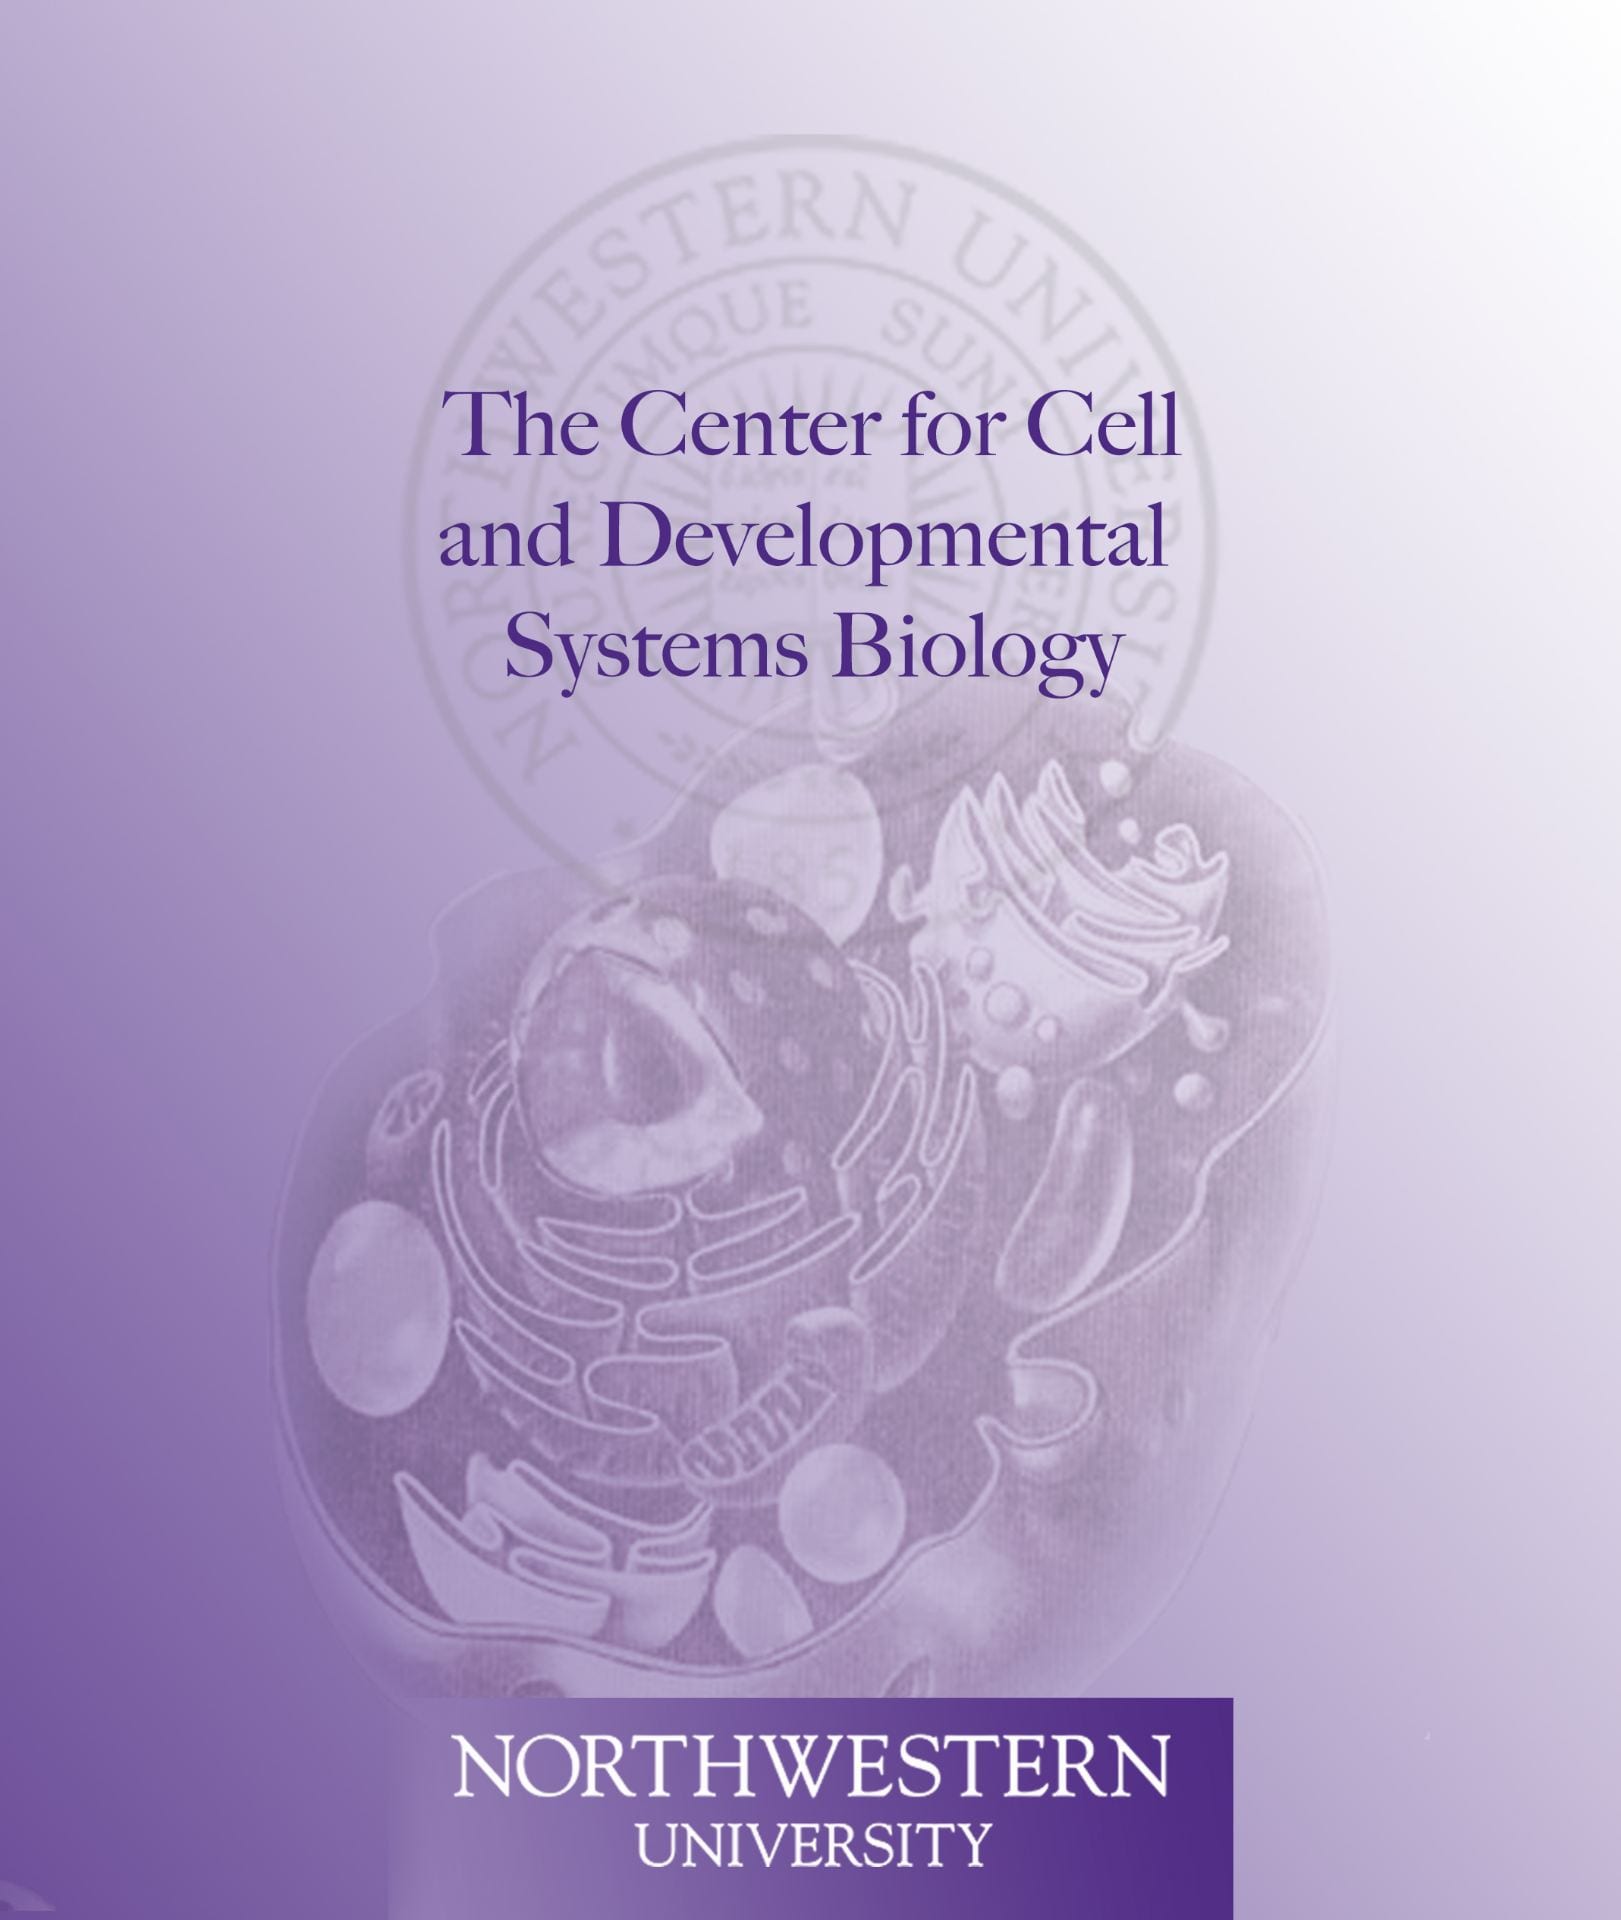 The Center for Cell and Developmental Systems Biology